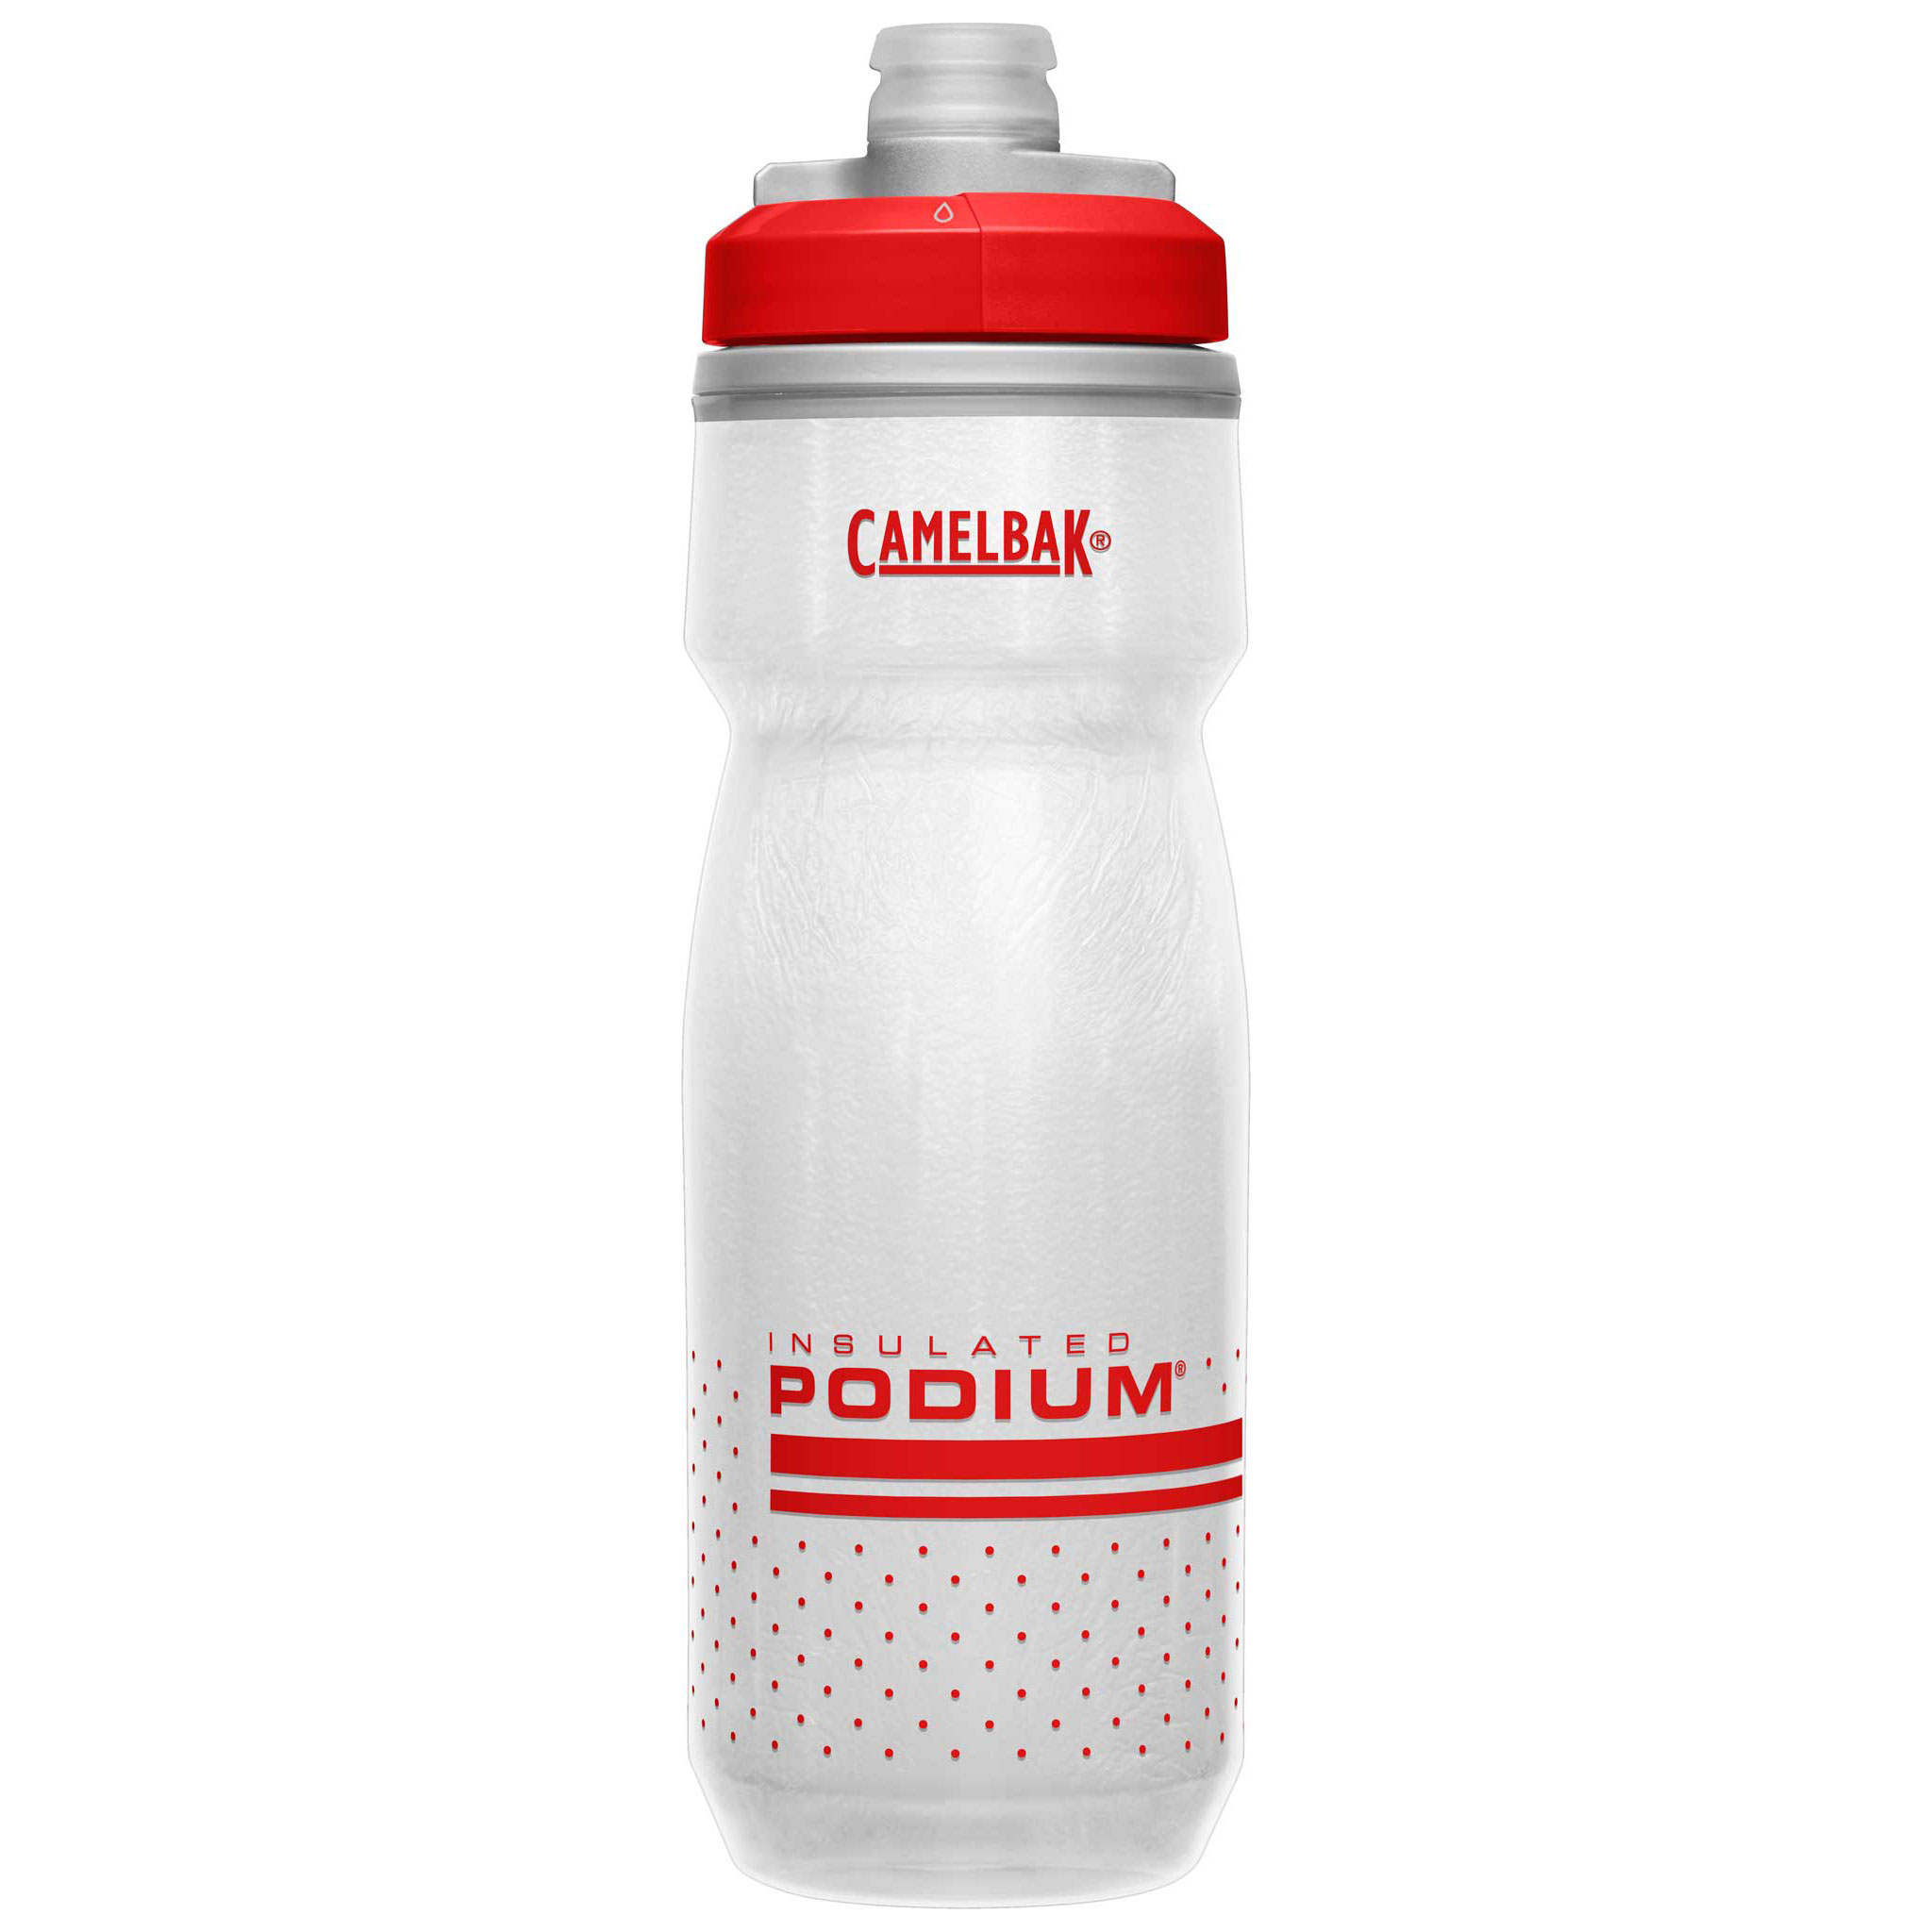 Camelbak Podium Chill Insulated Bottle, Fiery Red/White - 21oz